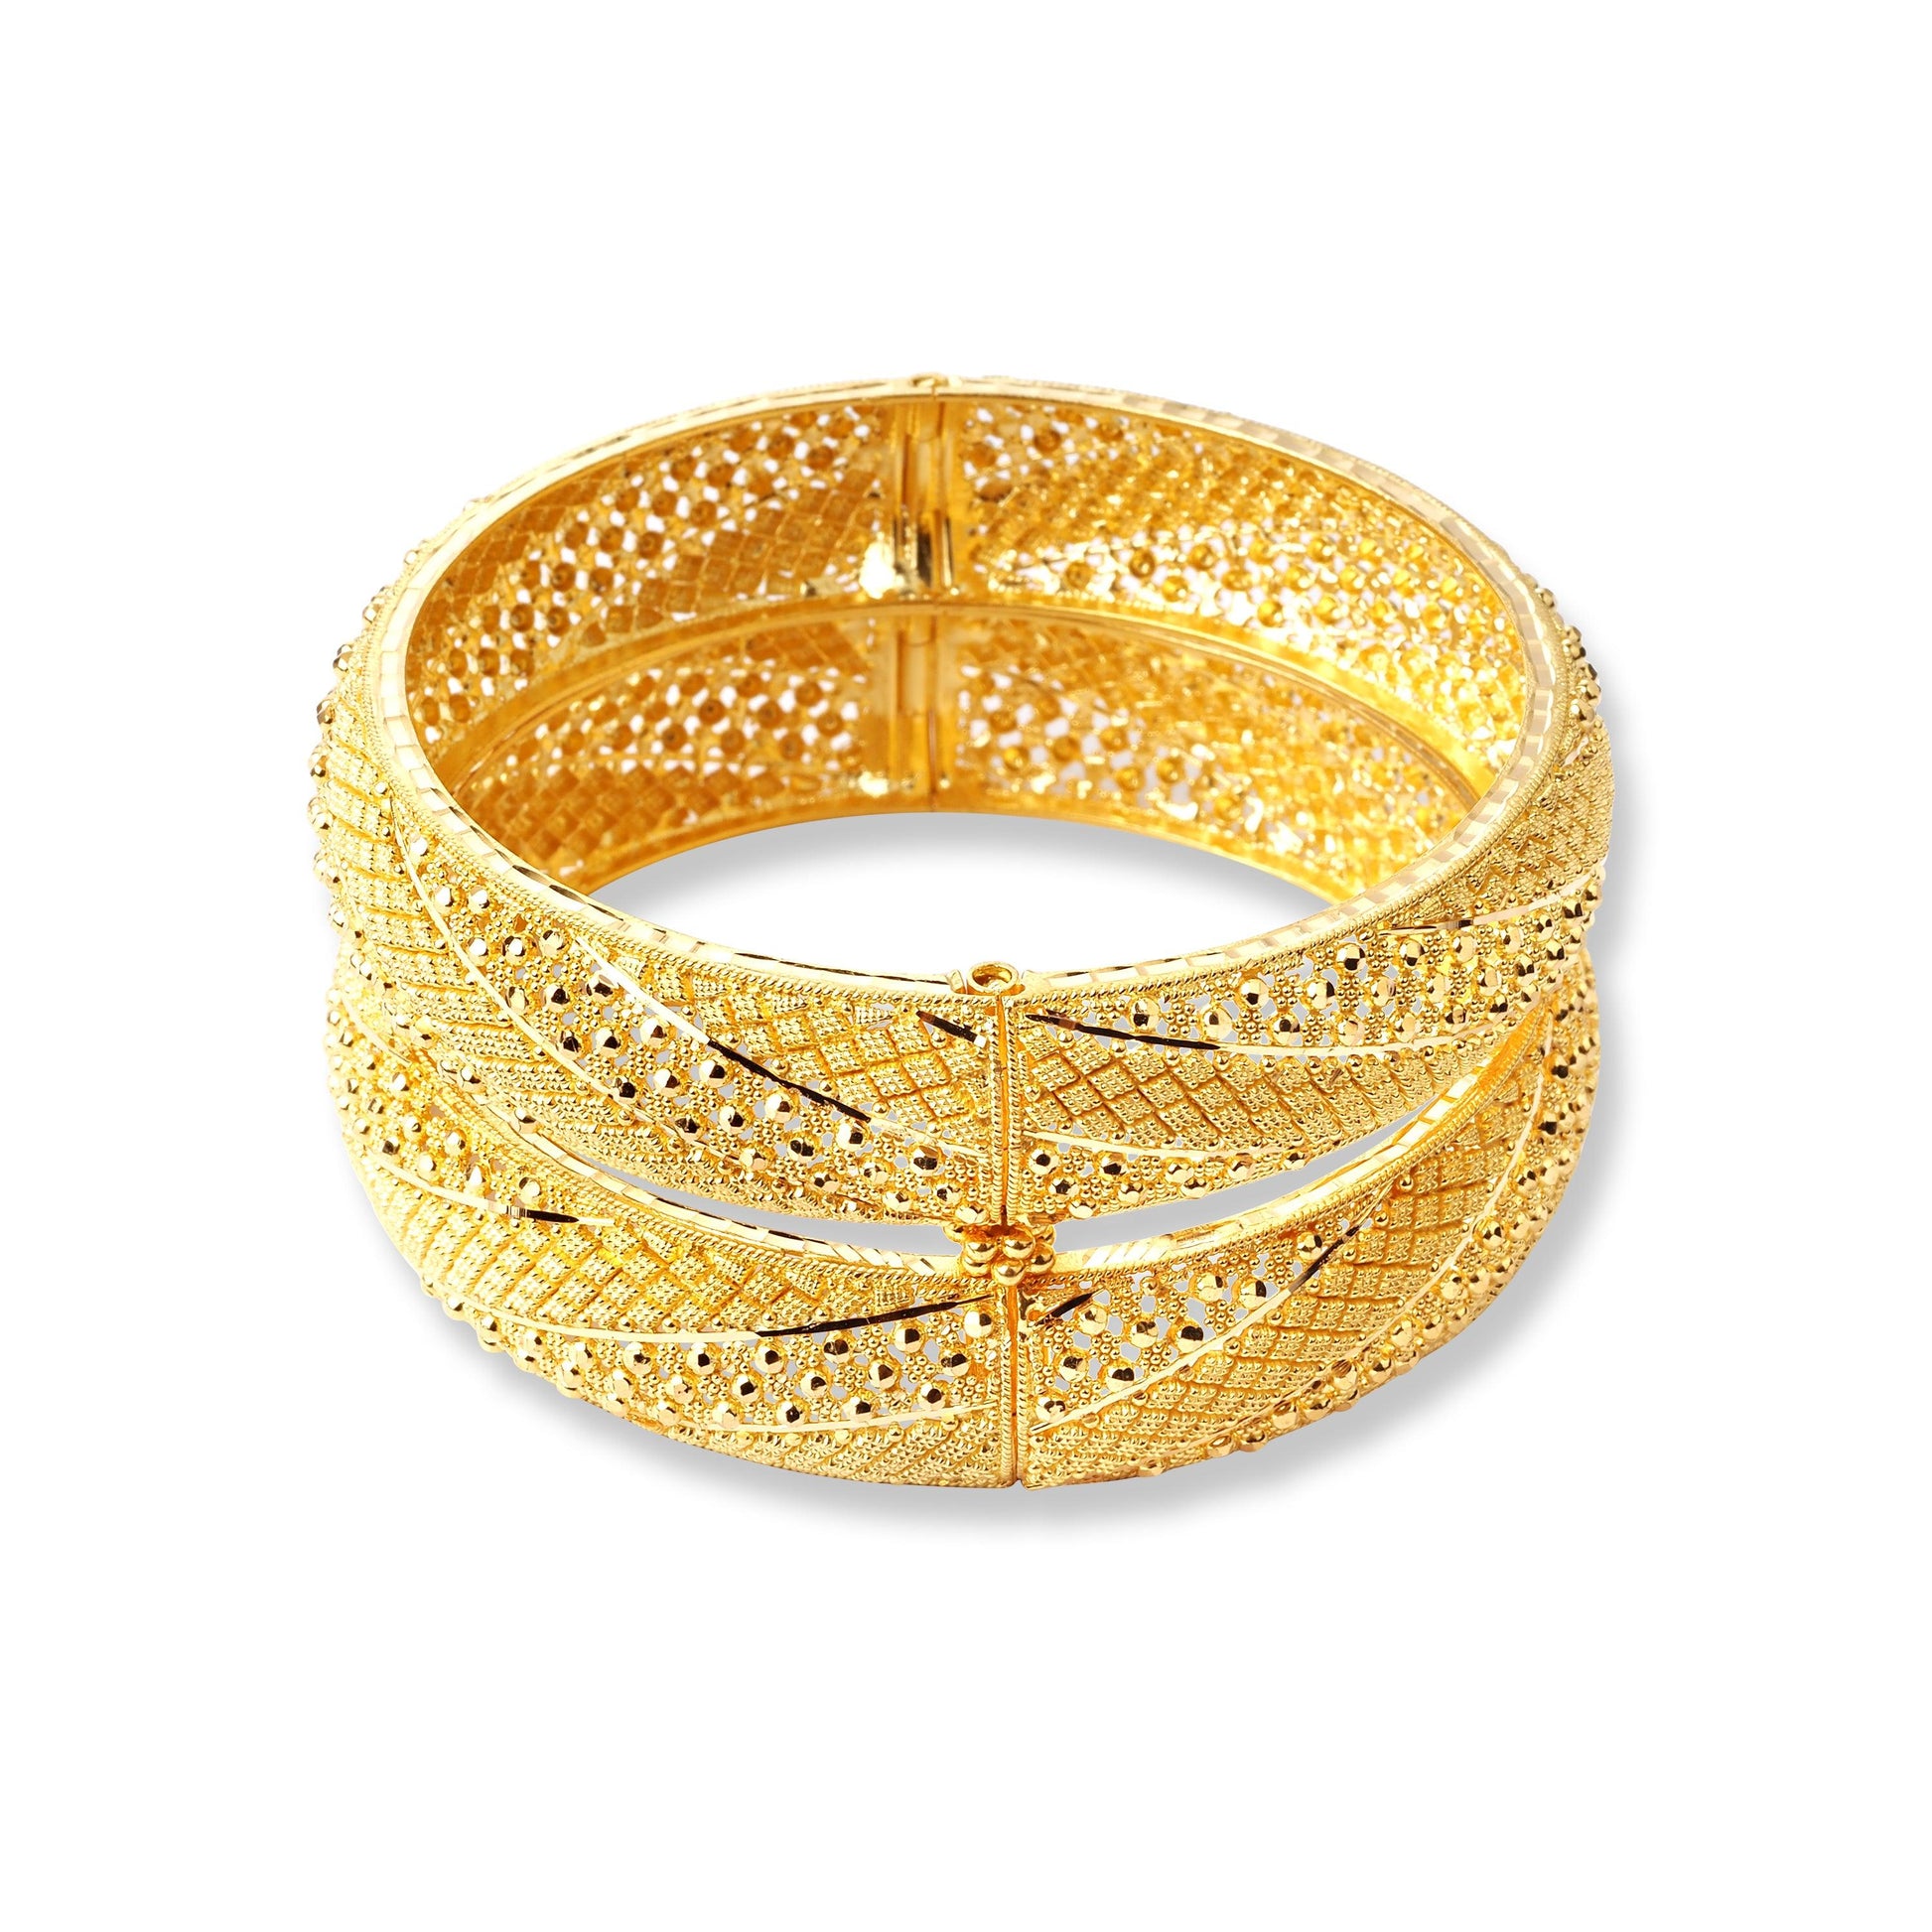 Pair of 22ct Bangles With Hinge & Openable Screw Fitting B-8515 - Minar Jewellers